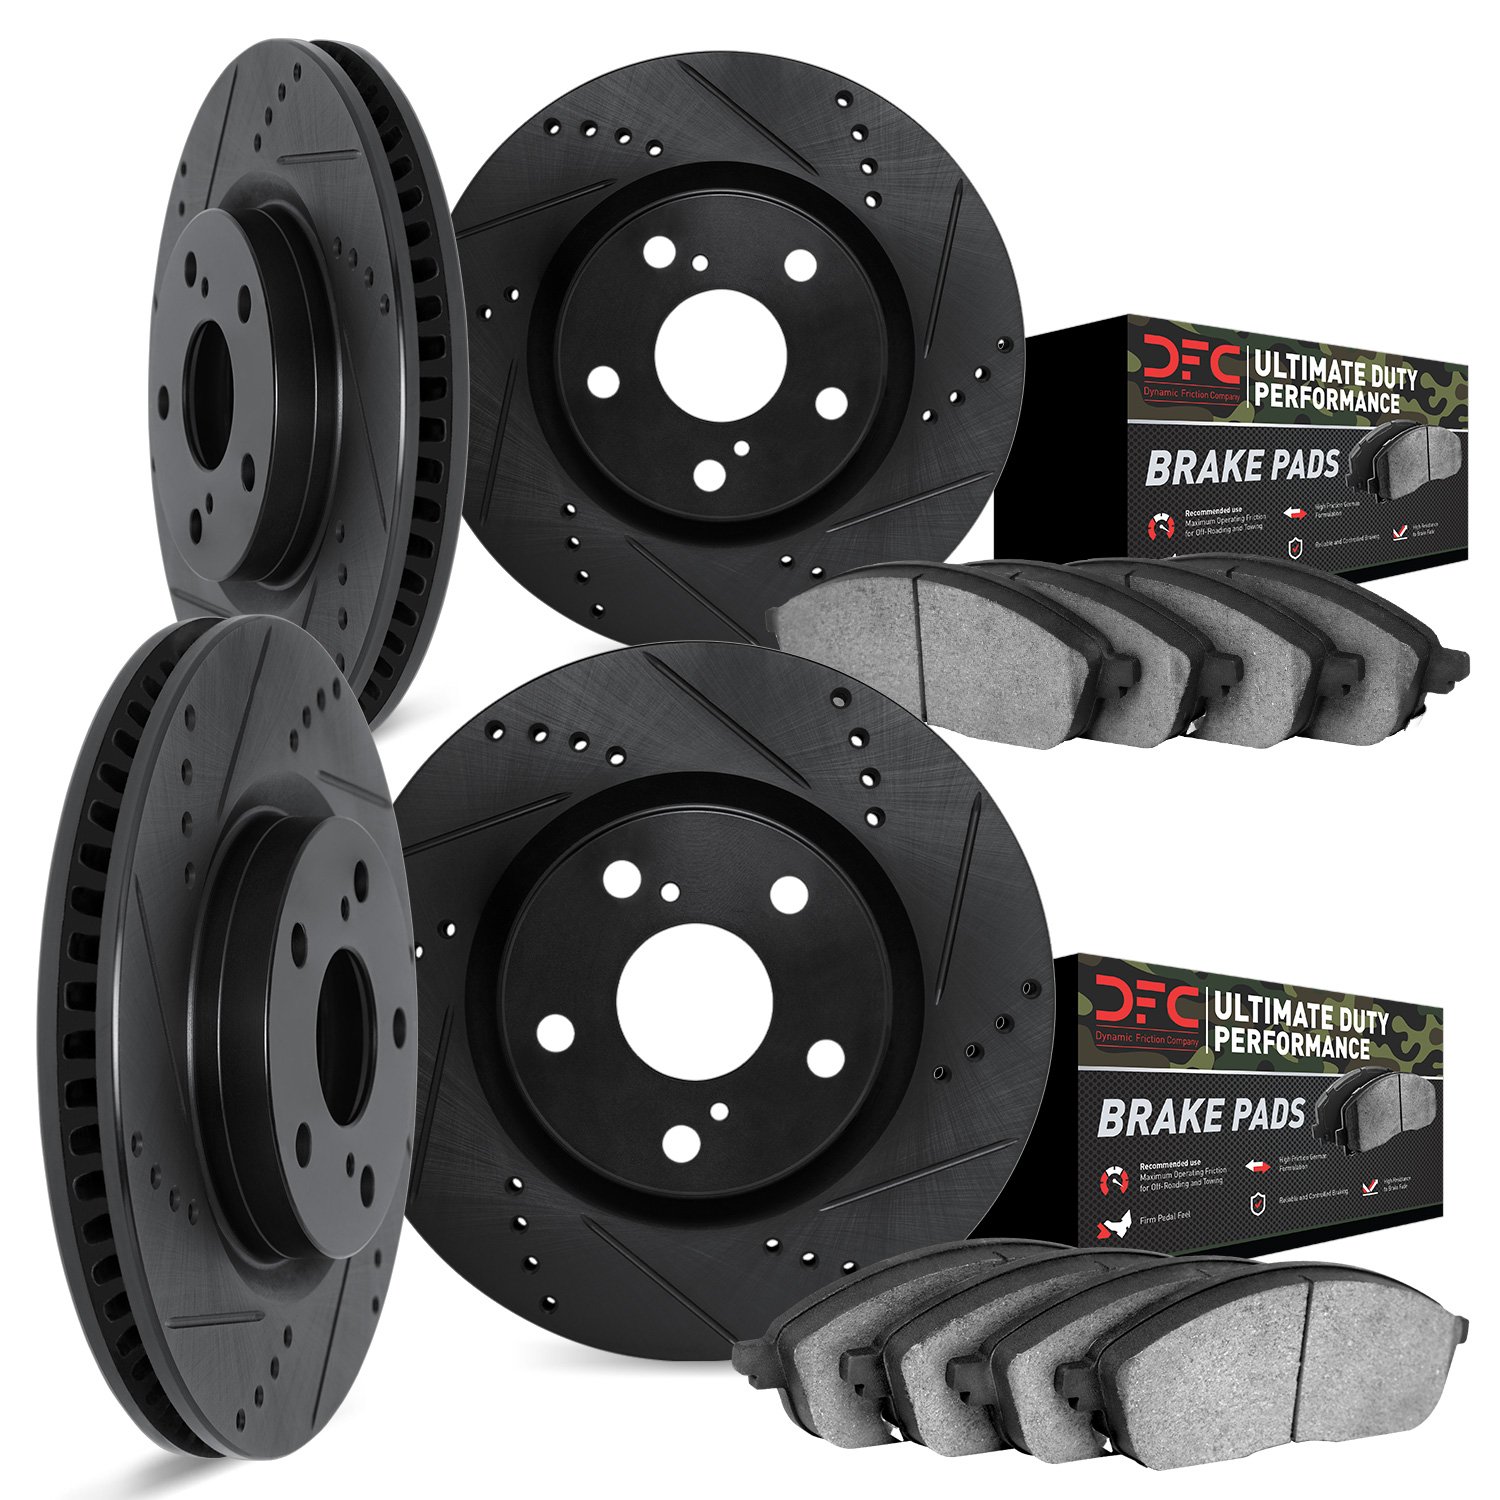 8404-76007 Drilled/Slotted Brake Rotors with Ultimate-Duty Brake Pads Kit [Black], 2008-2021 Lexus/Toyota/Scion, Position: Front